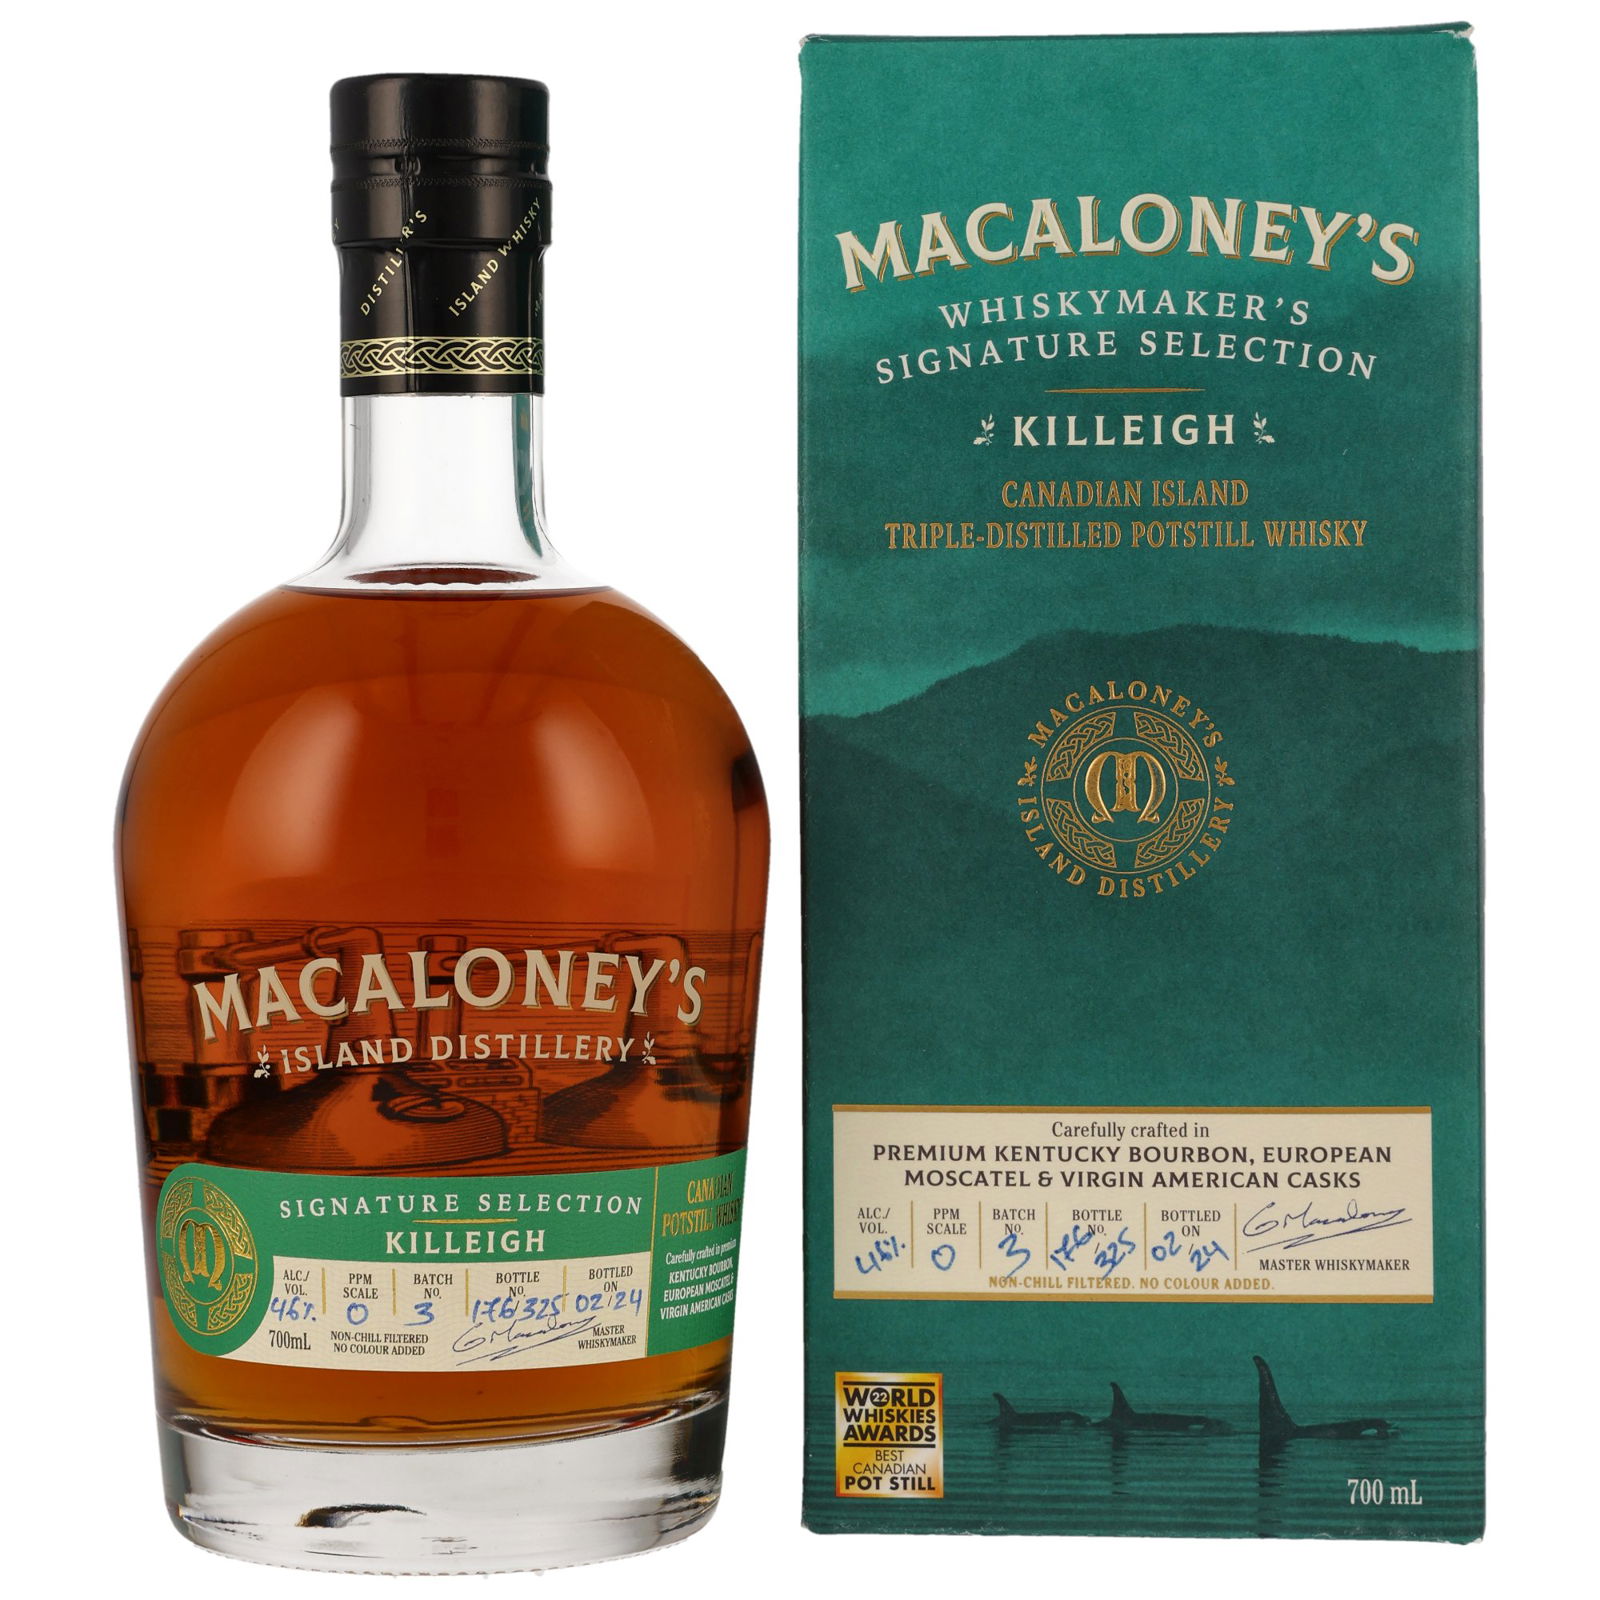 Macaloney's Killeigh Signature Selection